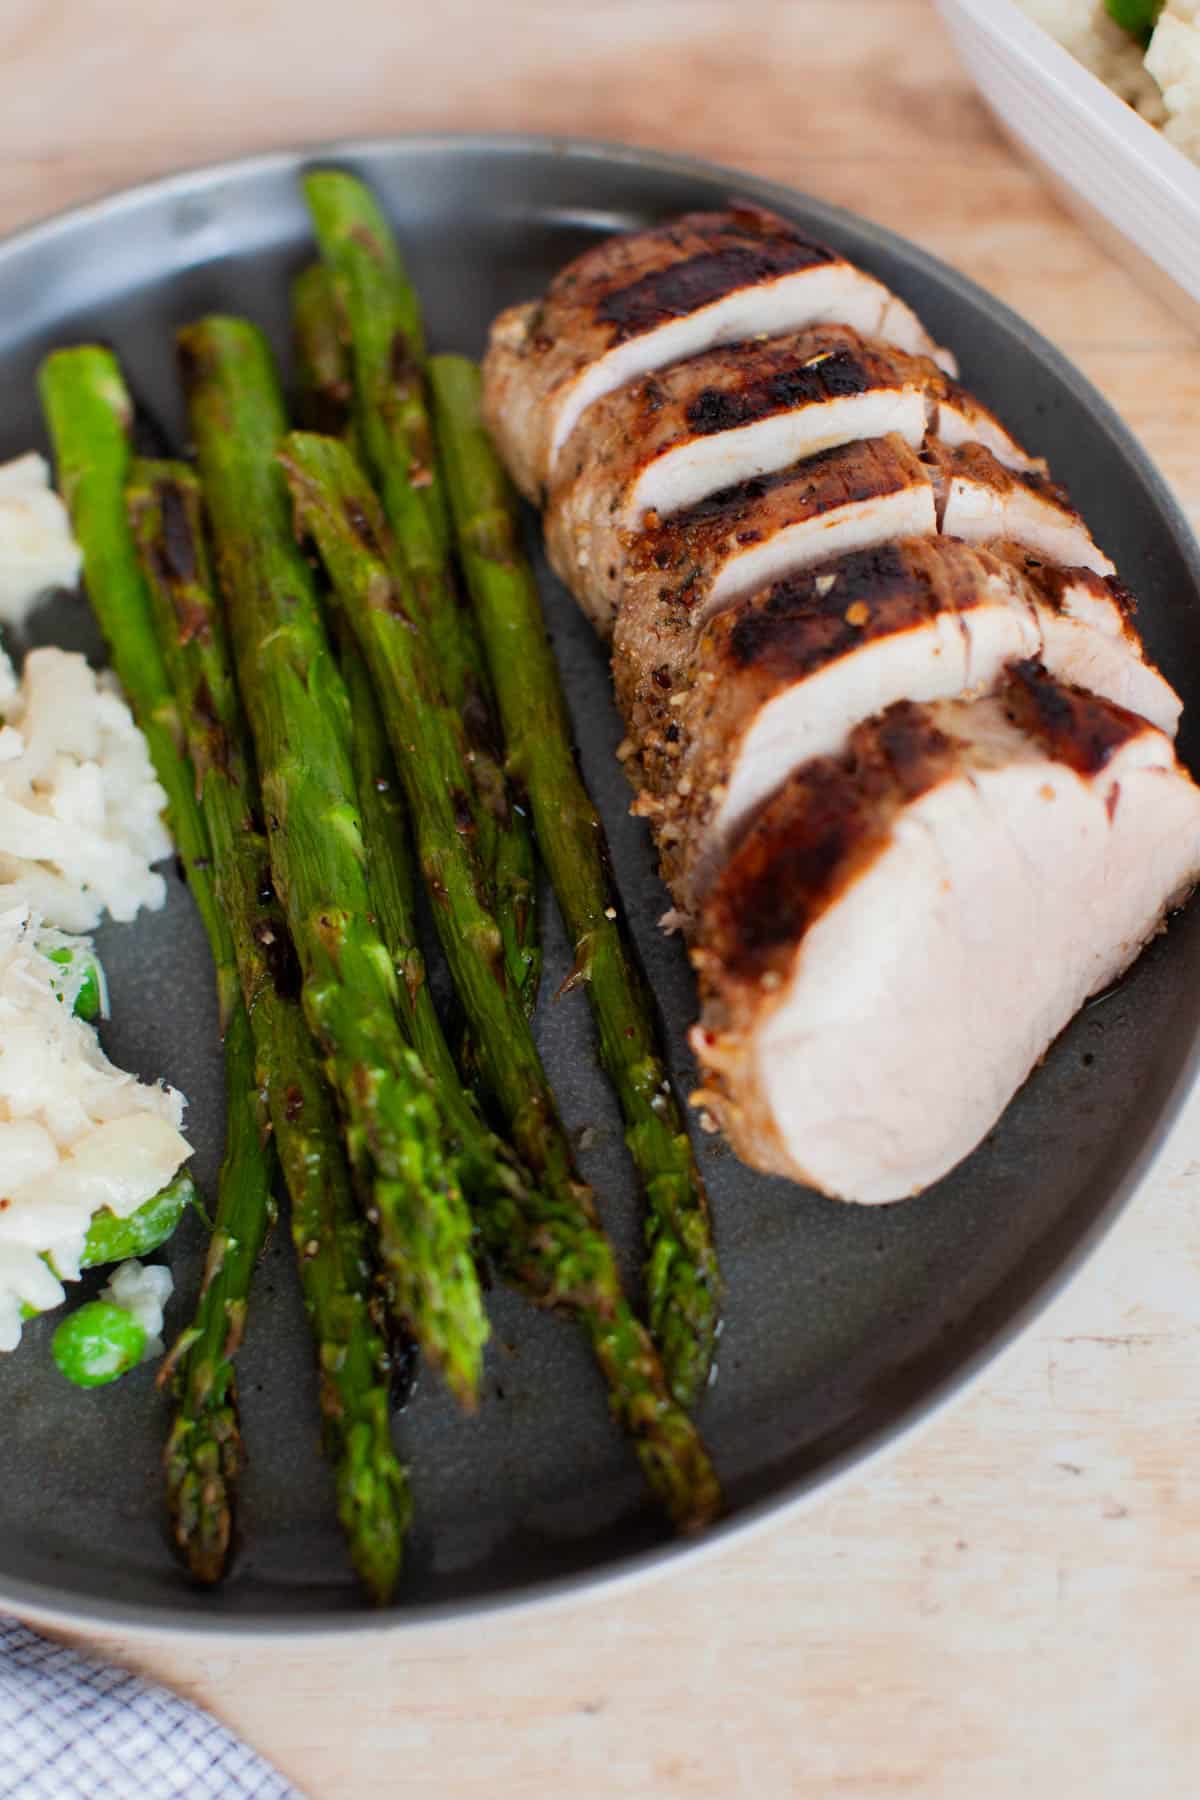 Slices of marinated pork tenderloins with asparagus and risotto on a plate.